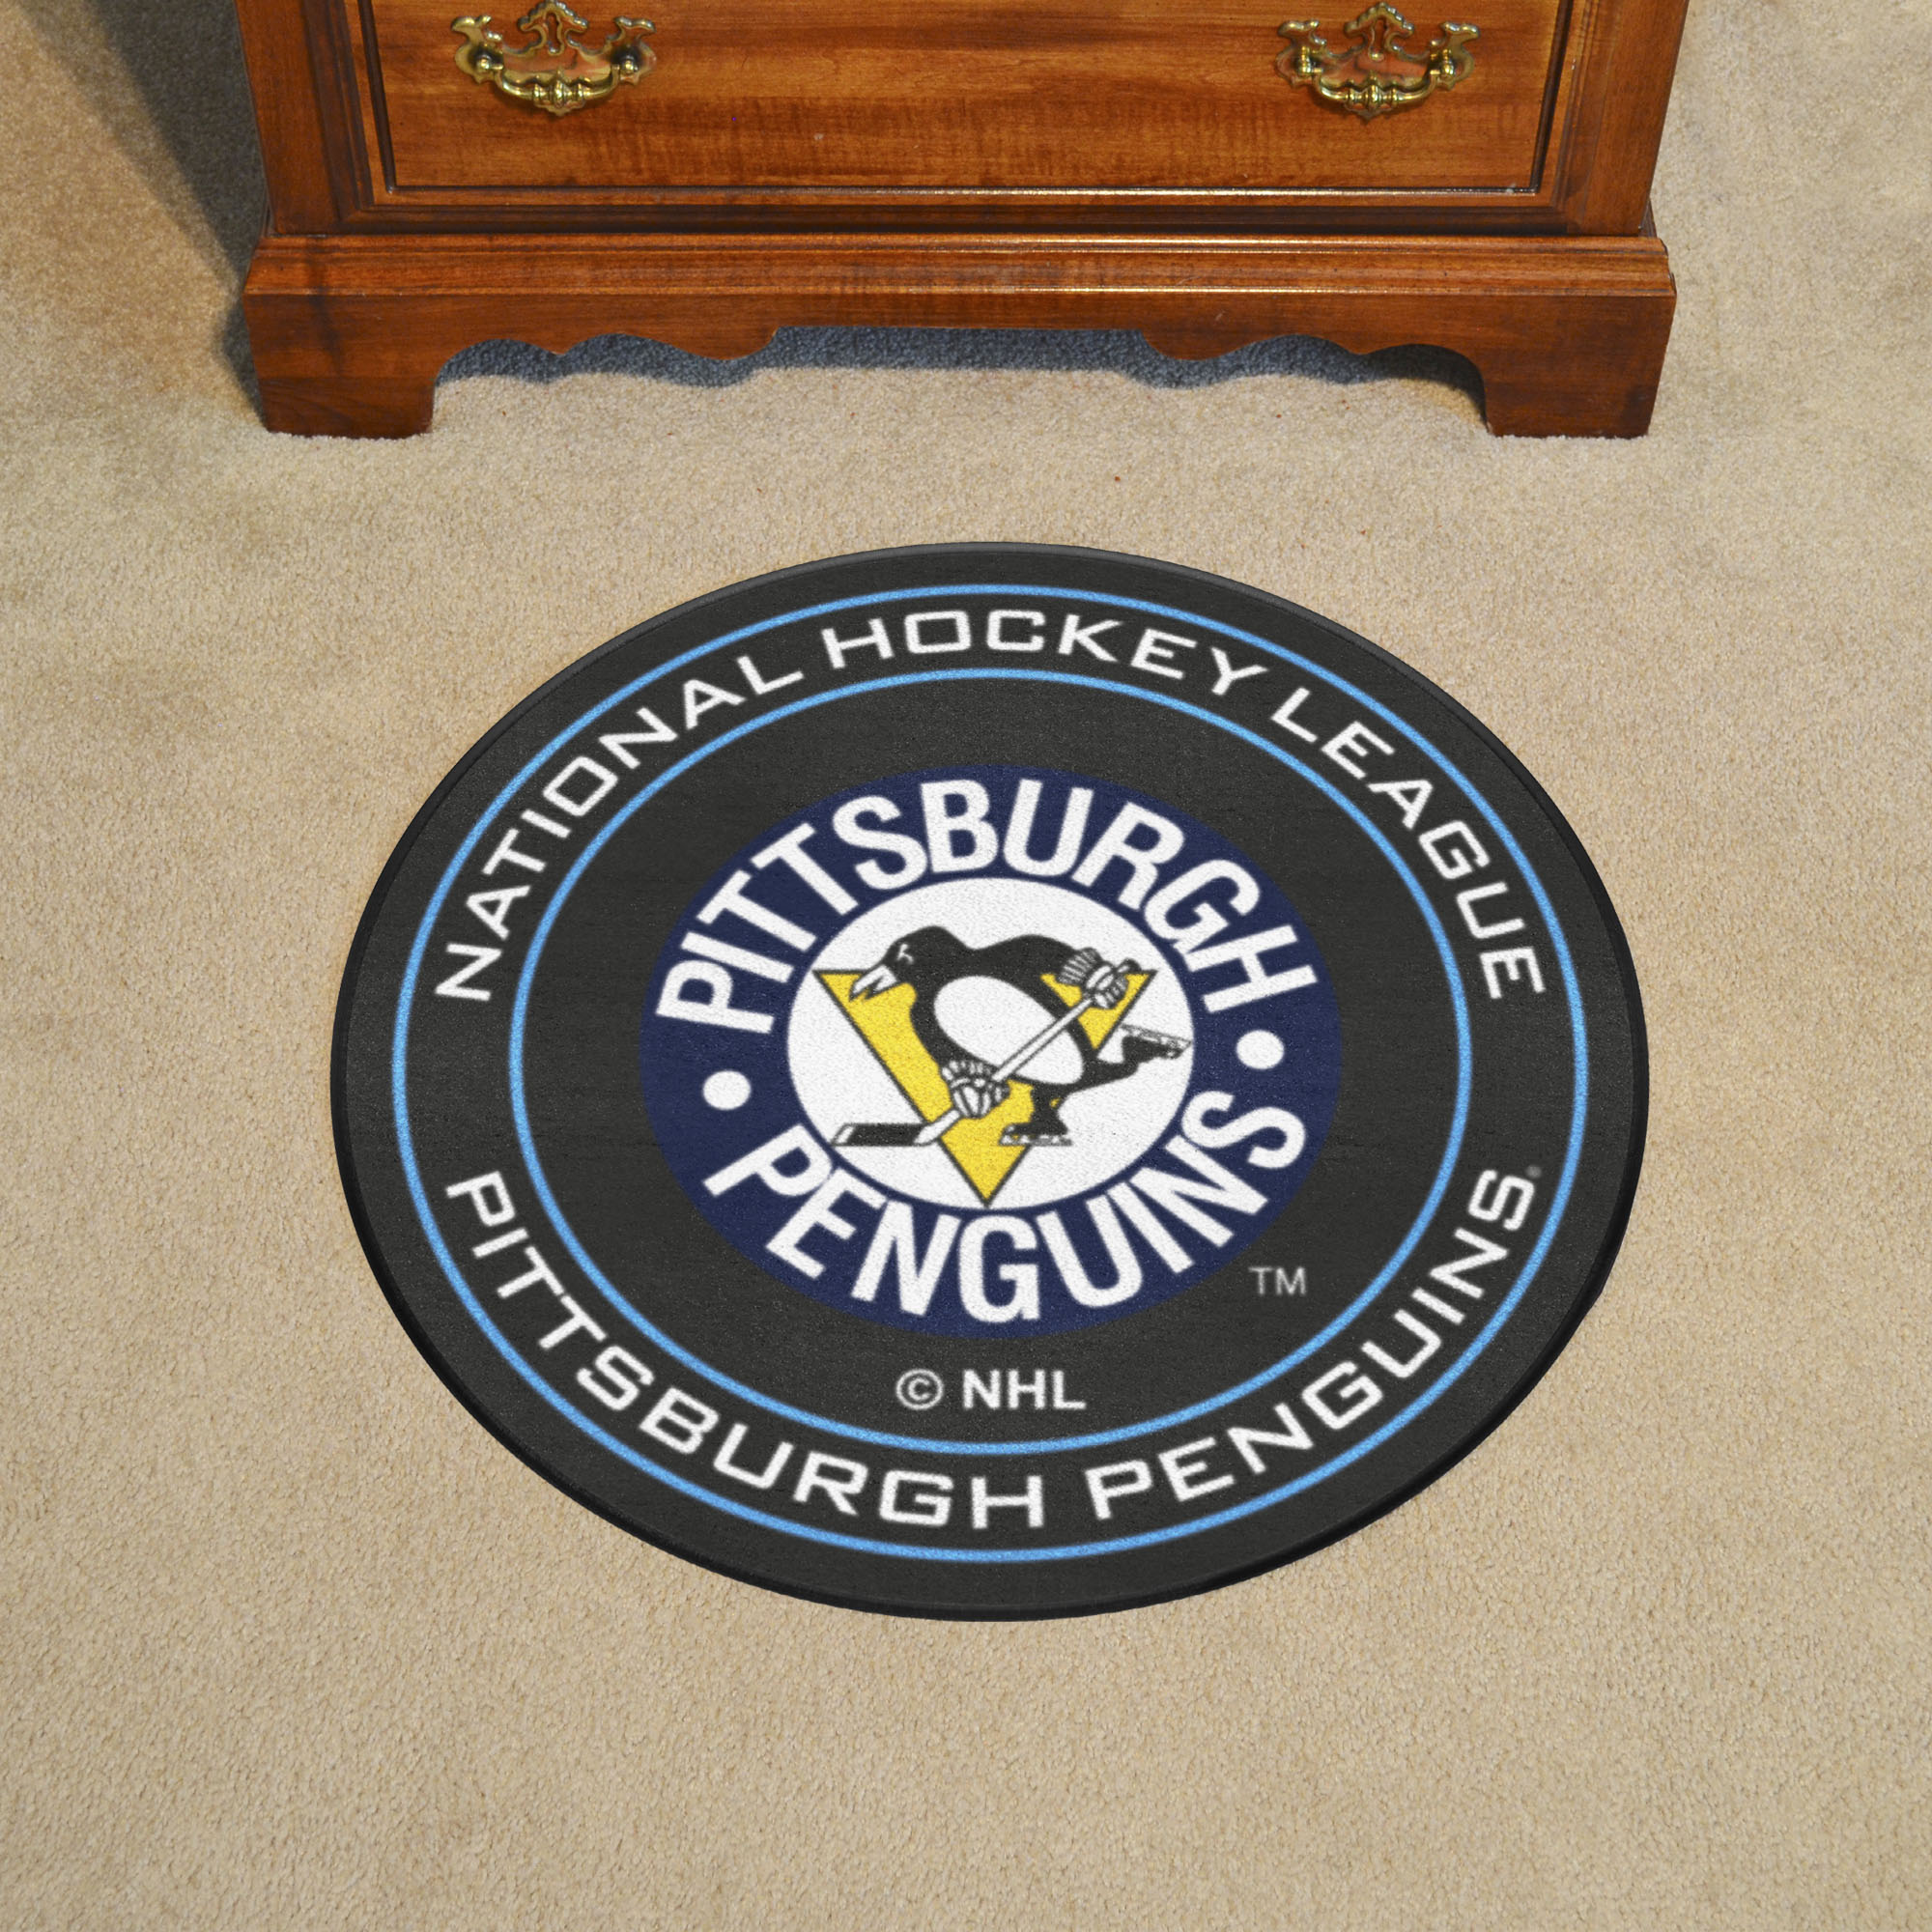 Pittsburgh Penguins Retro Moscot Hockey Puck Shaped Area Rug